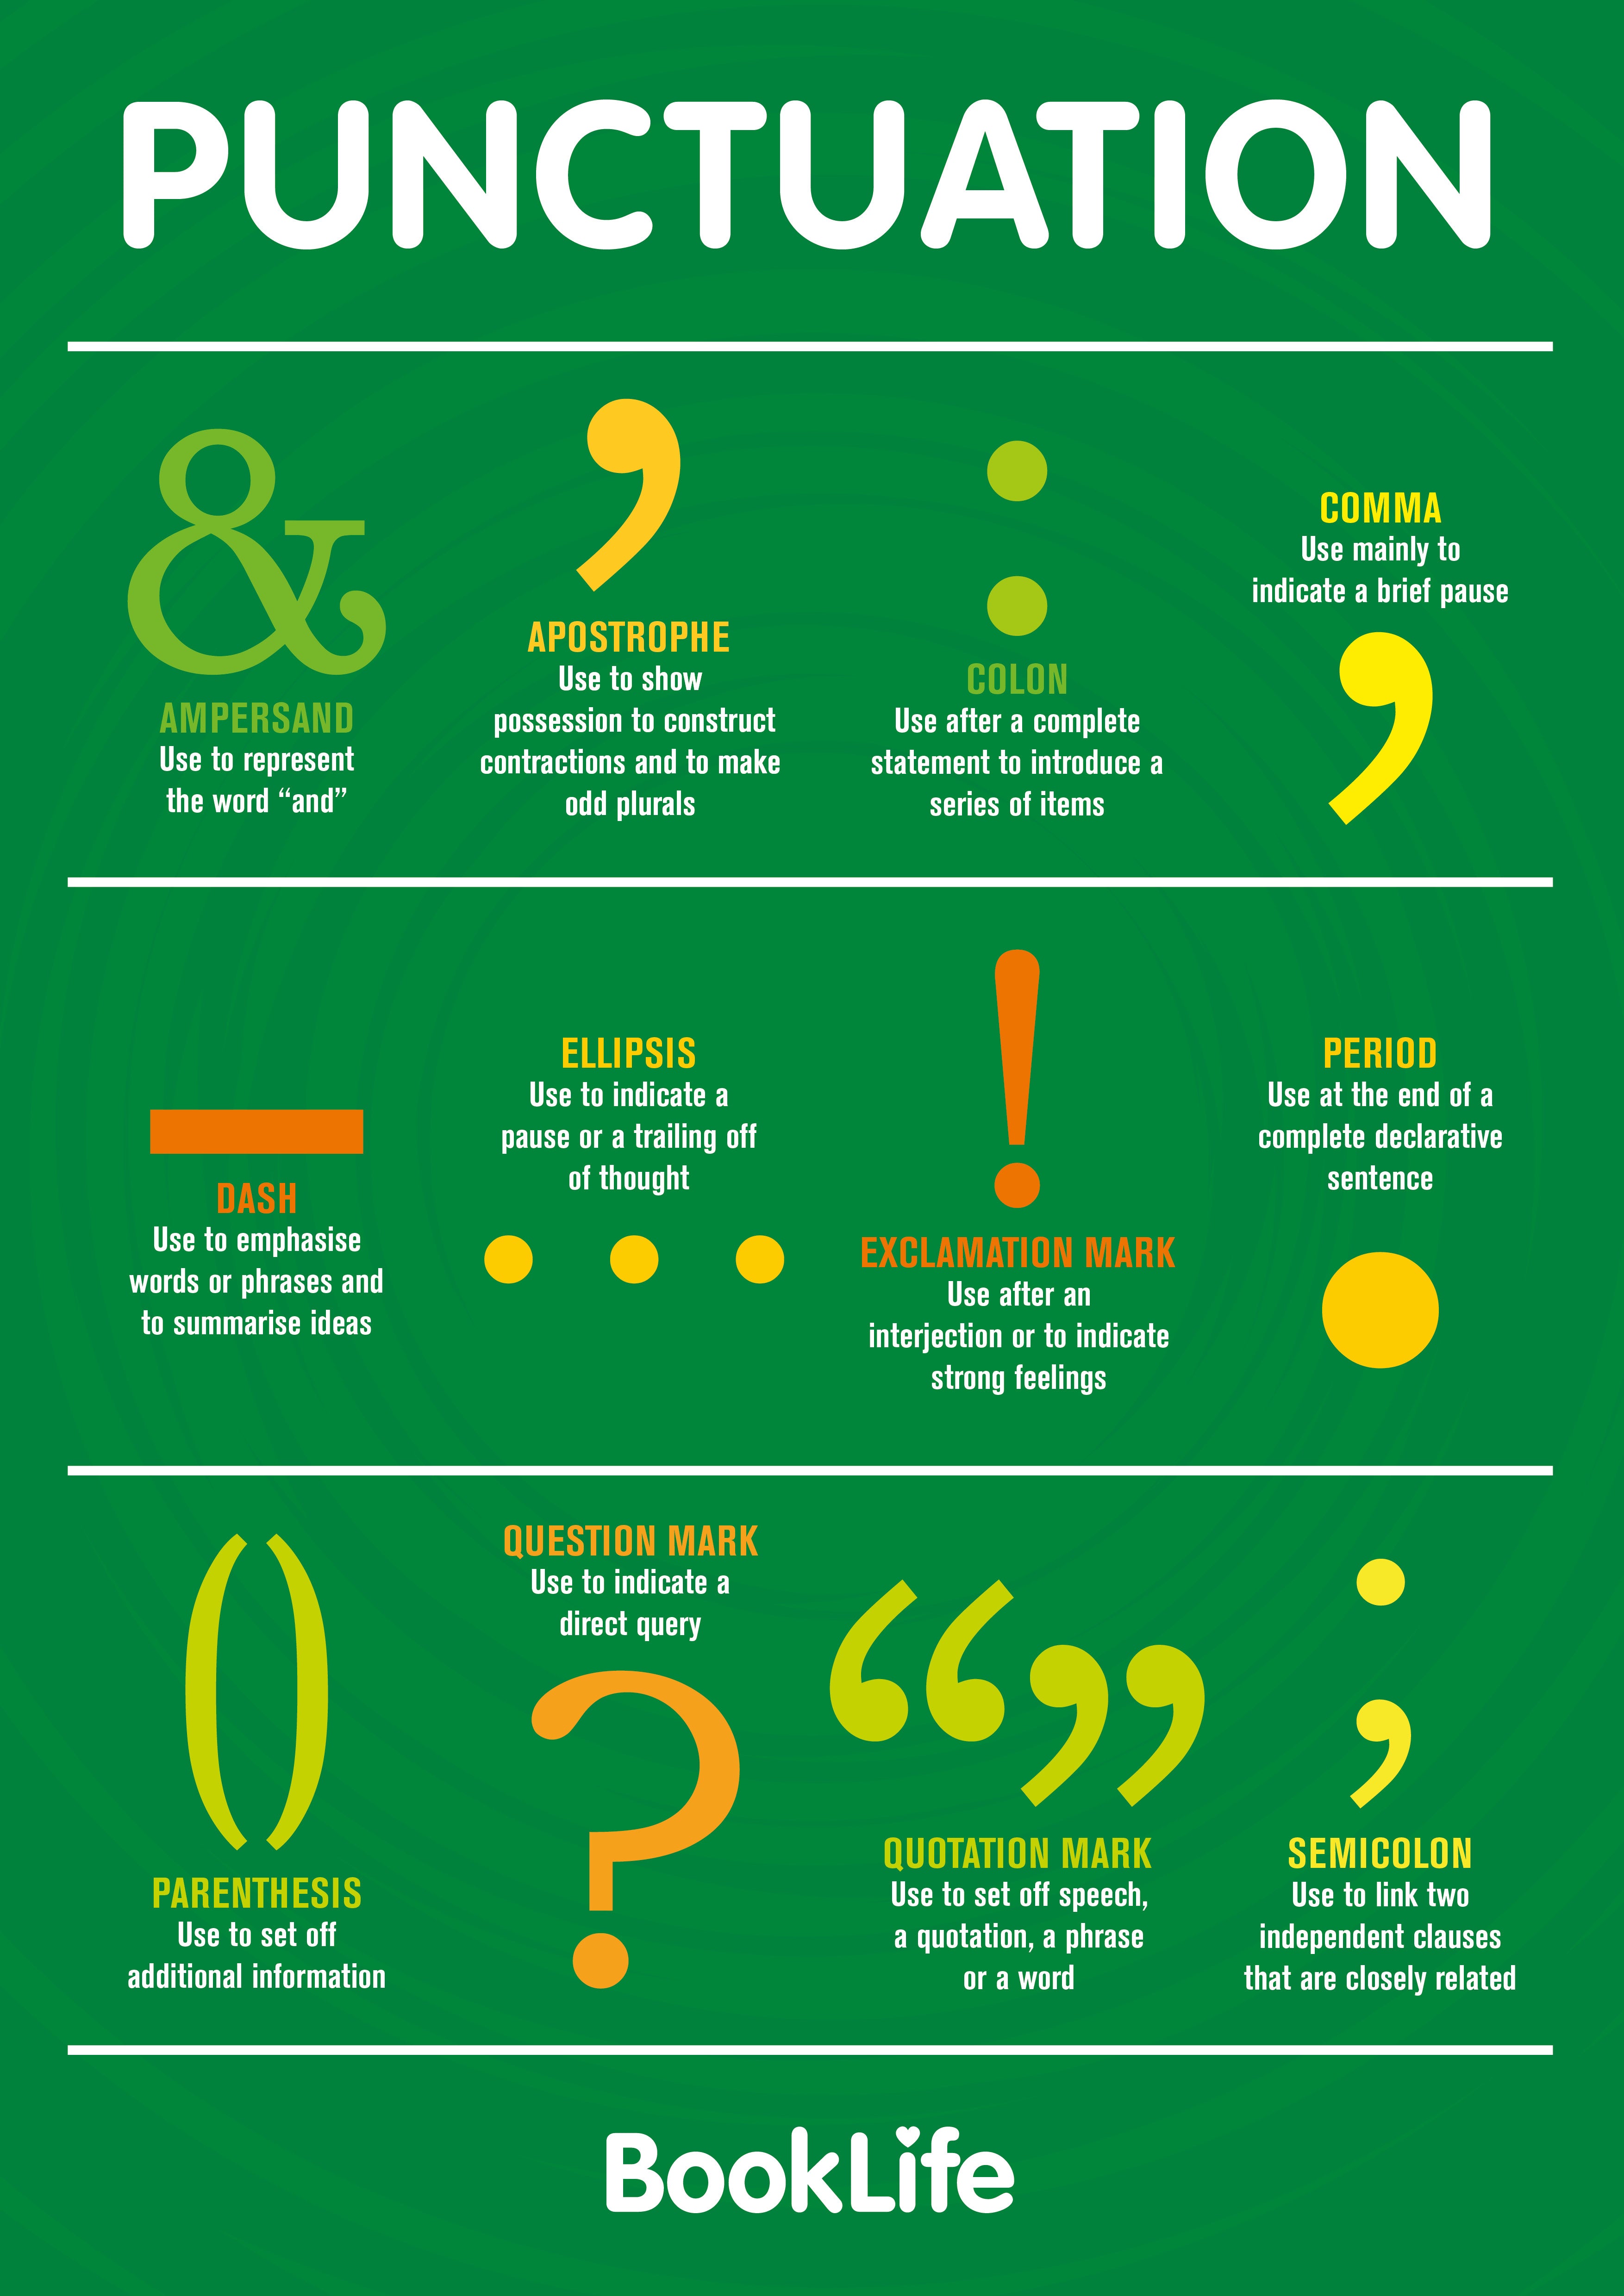 Free Punctuation Poster by BookLife